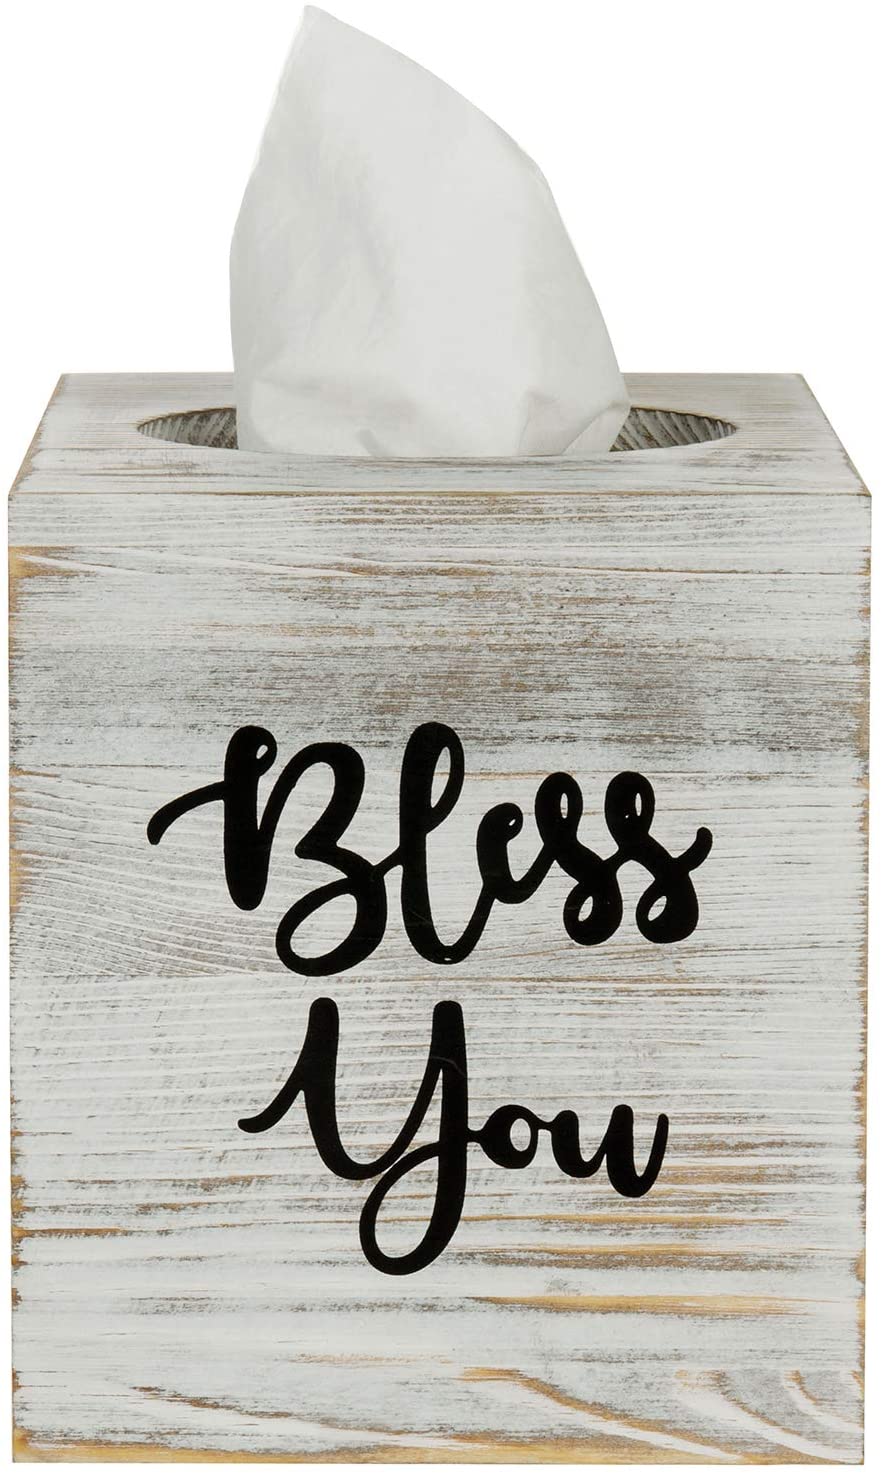 Bless You Shabby Whitewashed Wood Square Tissue Box Holder Cover